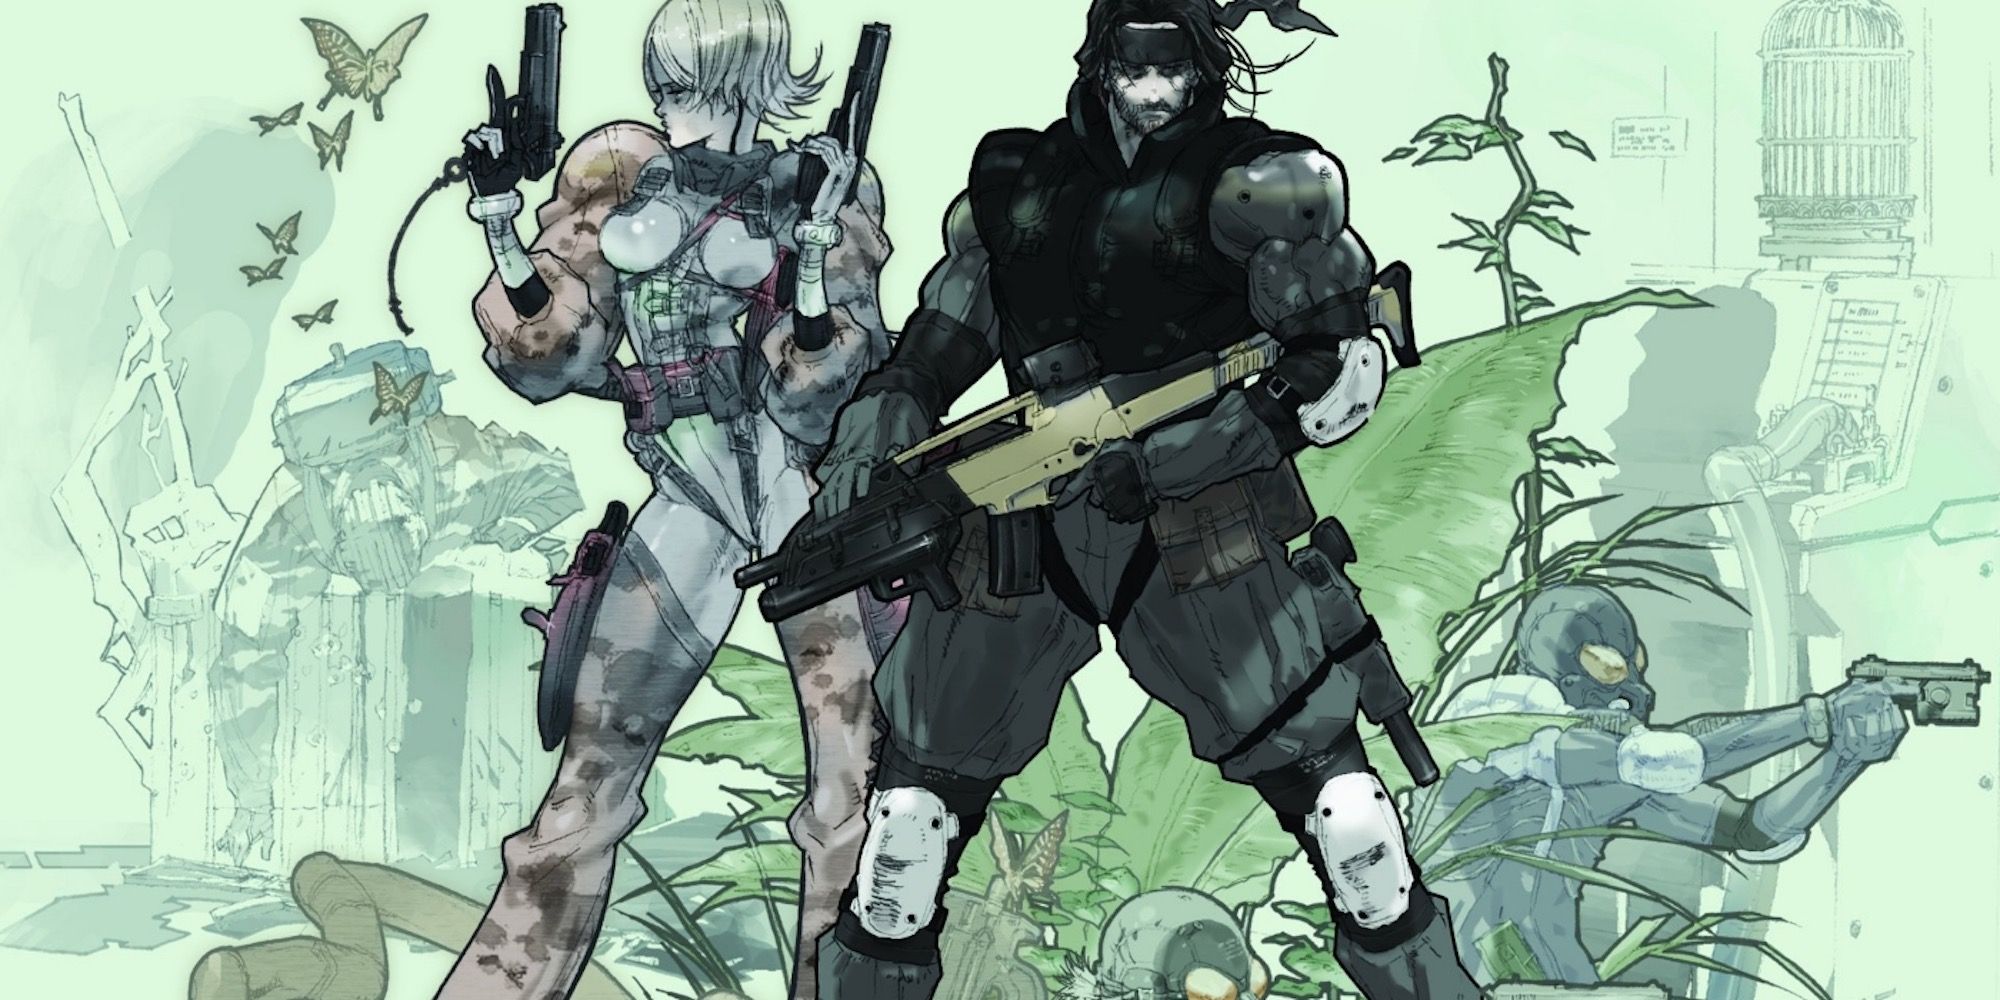 Promo art featuring characters in Metal Gear Acid